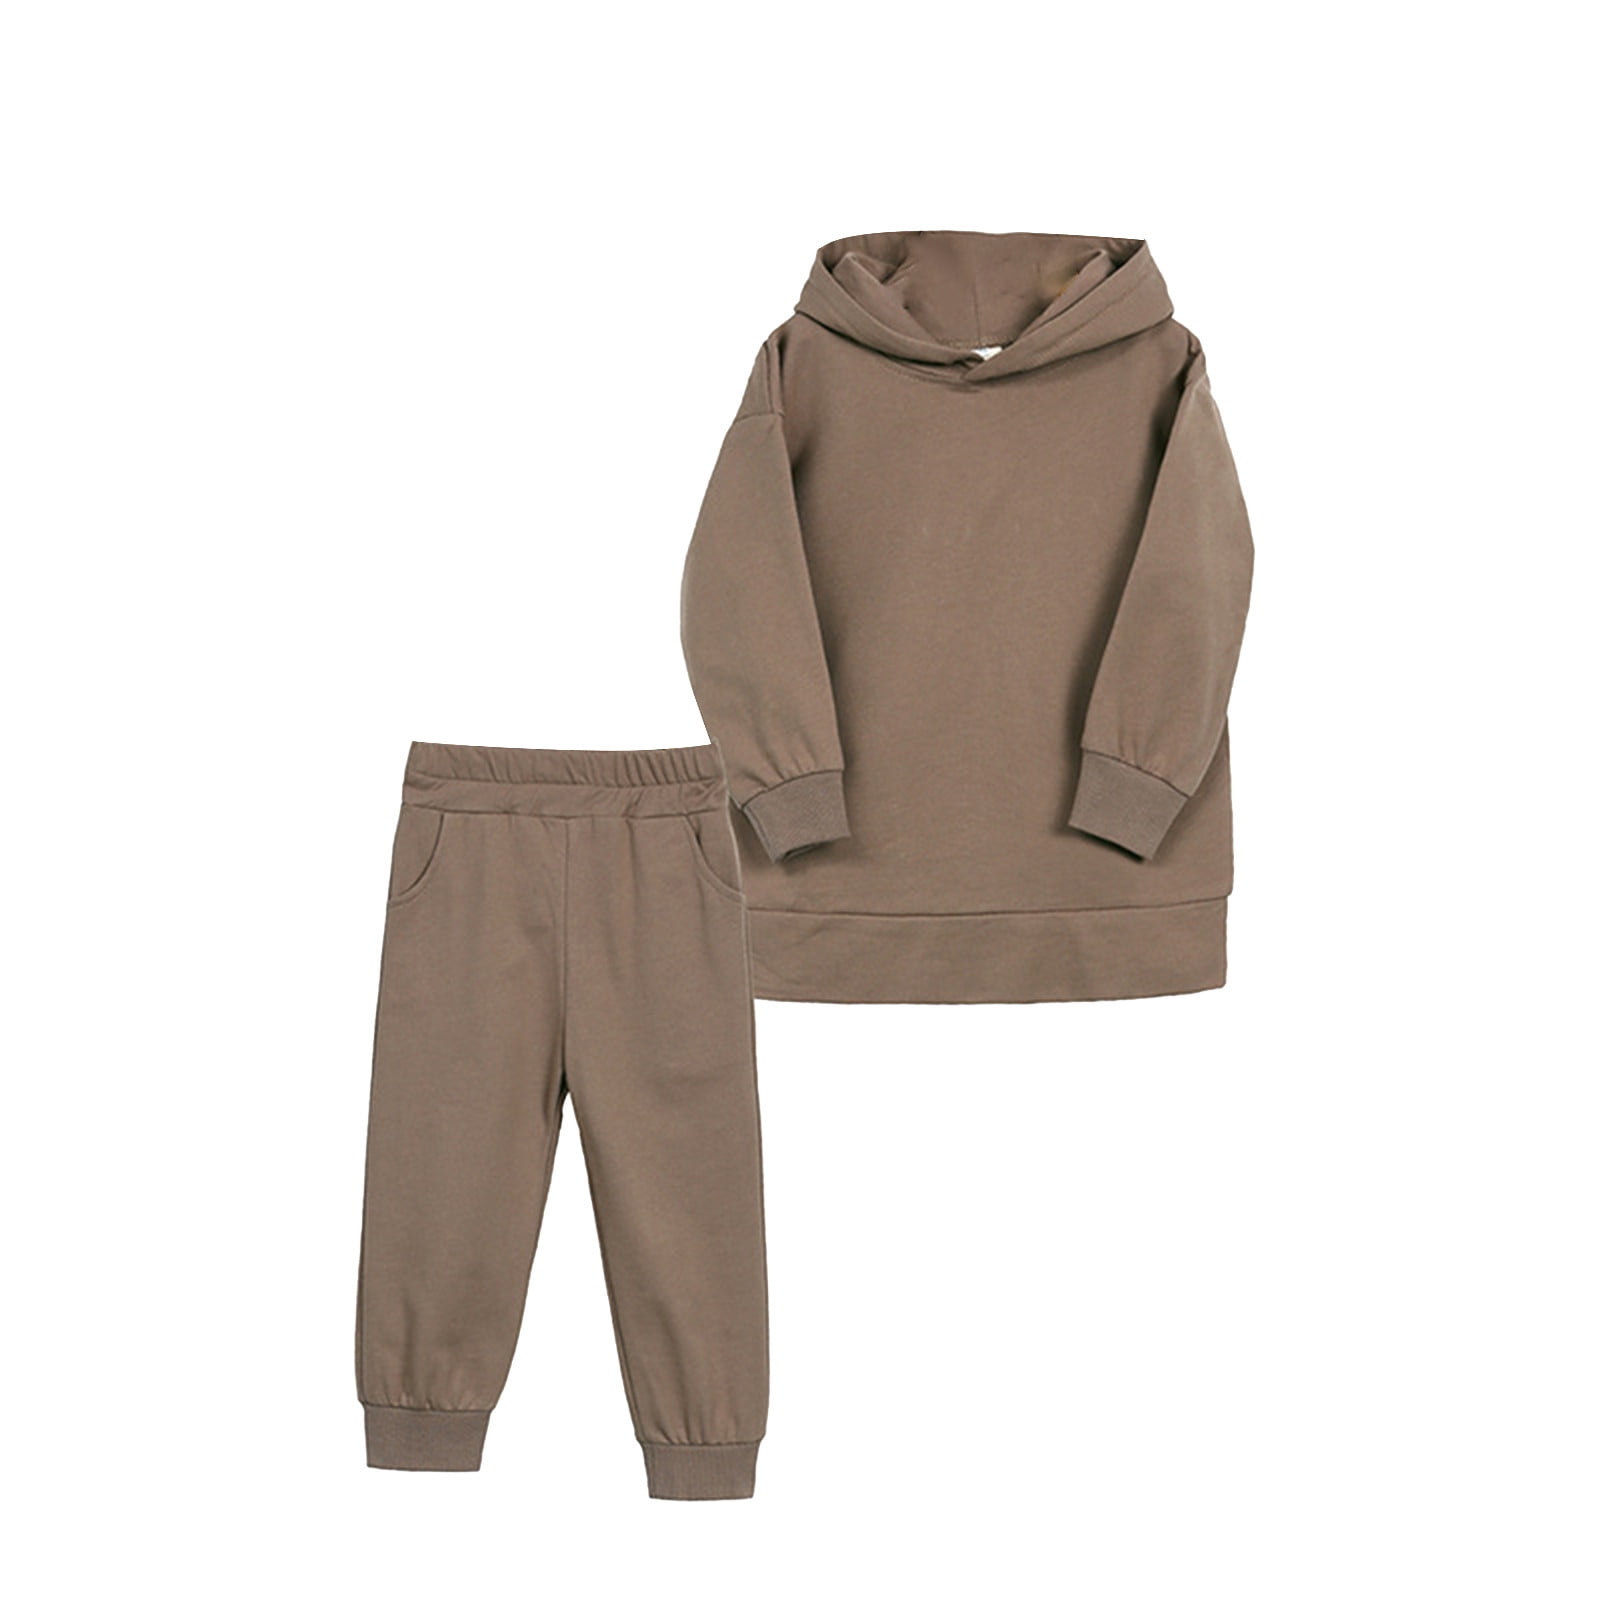 KaLI_store Cute Fall Outfits Boys Hoodie and Sweatpants 2 Piece